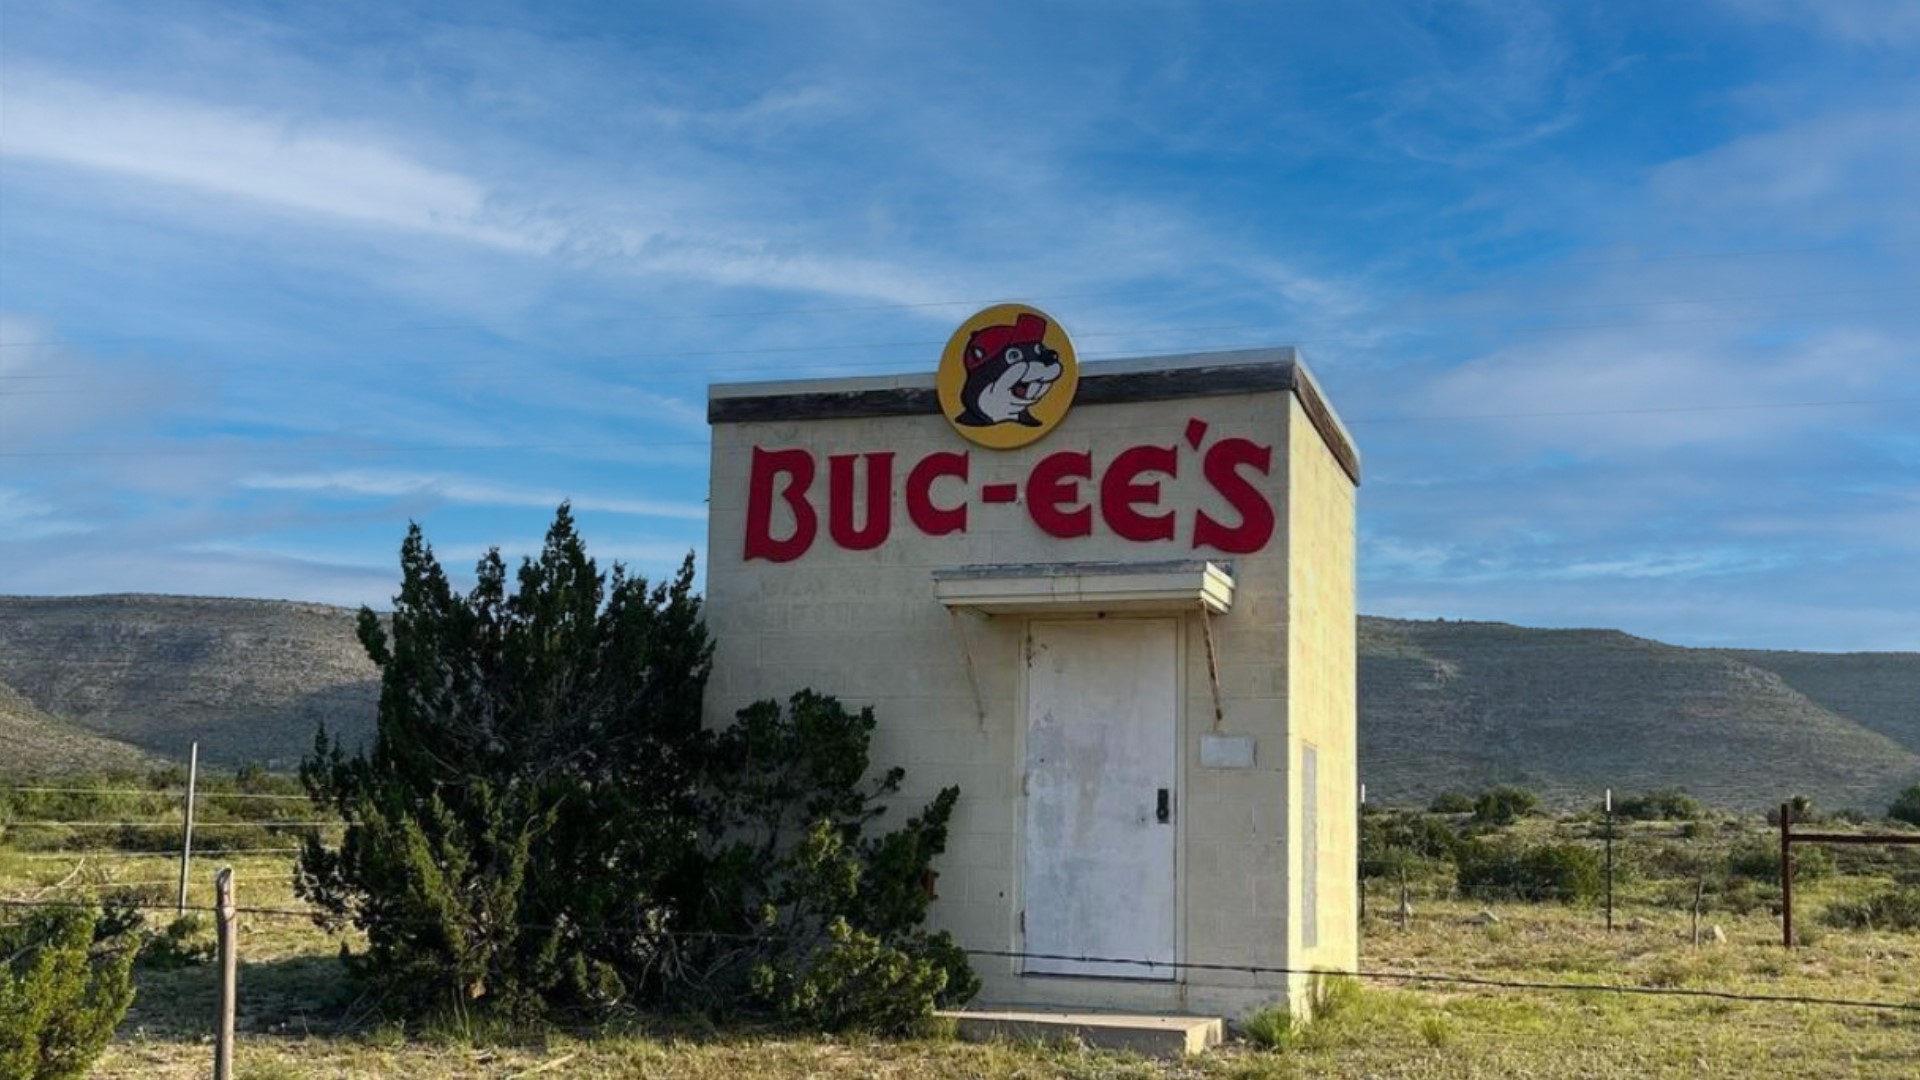 This Buc-ee's is similar to the Prada Store in Marfa that was built back in 2005.